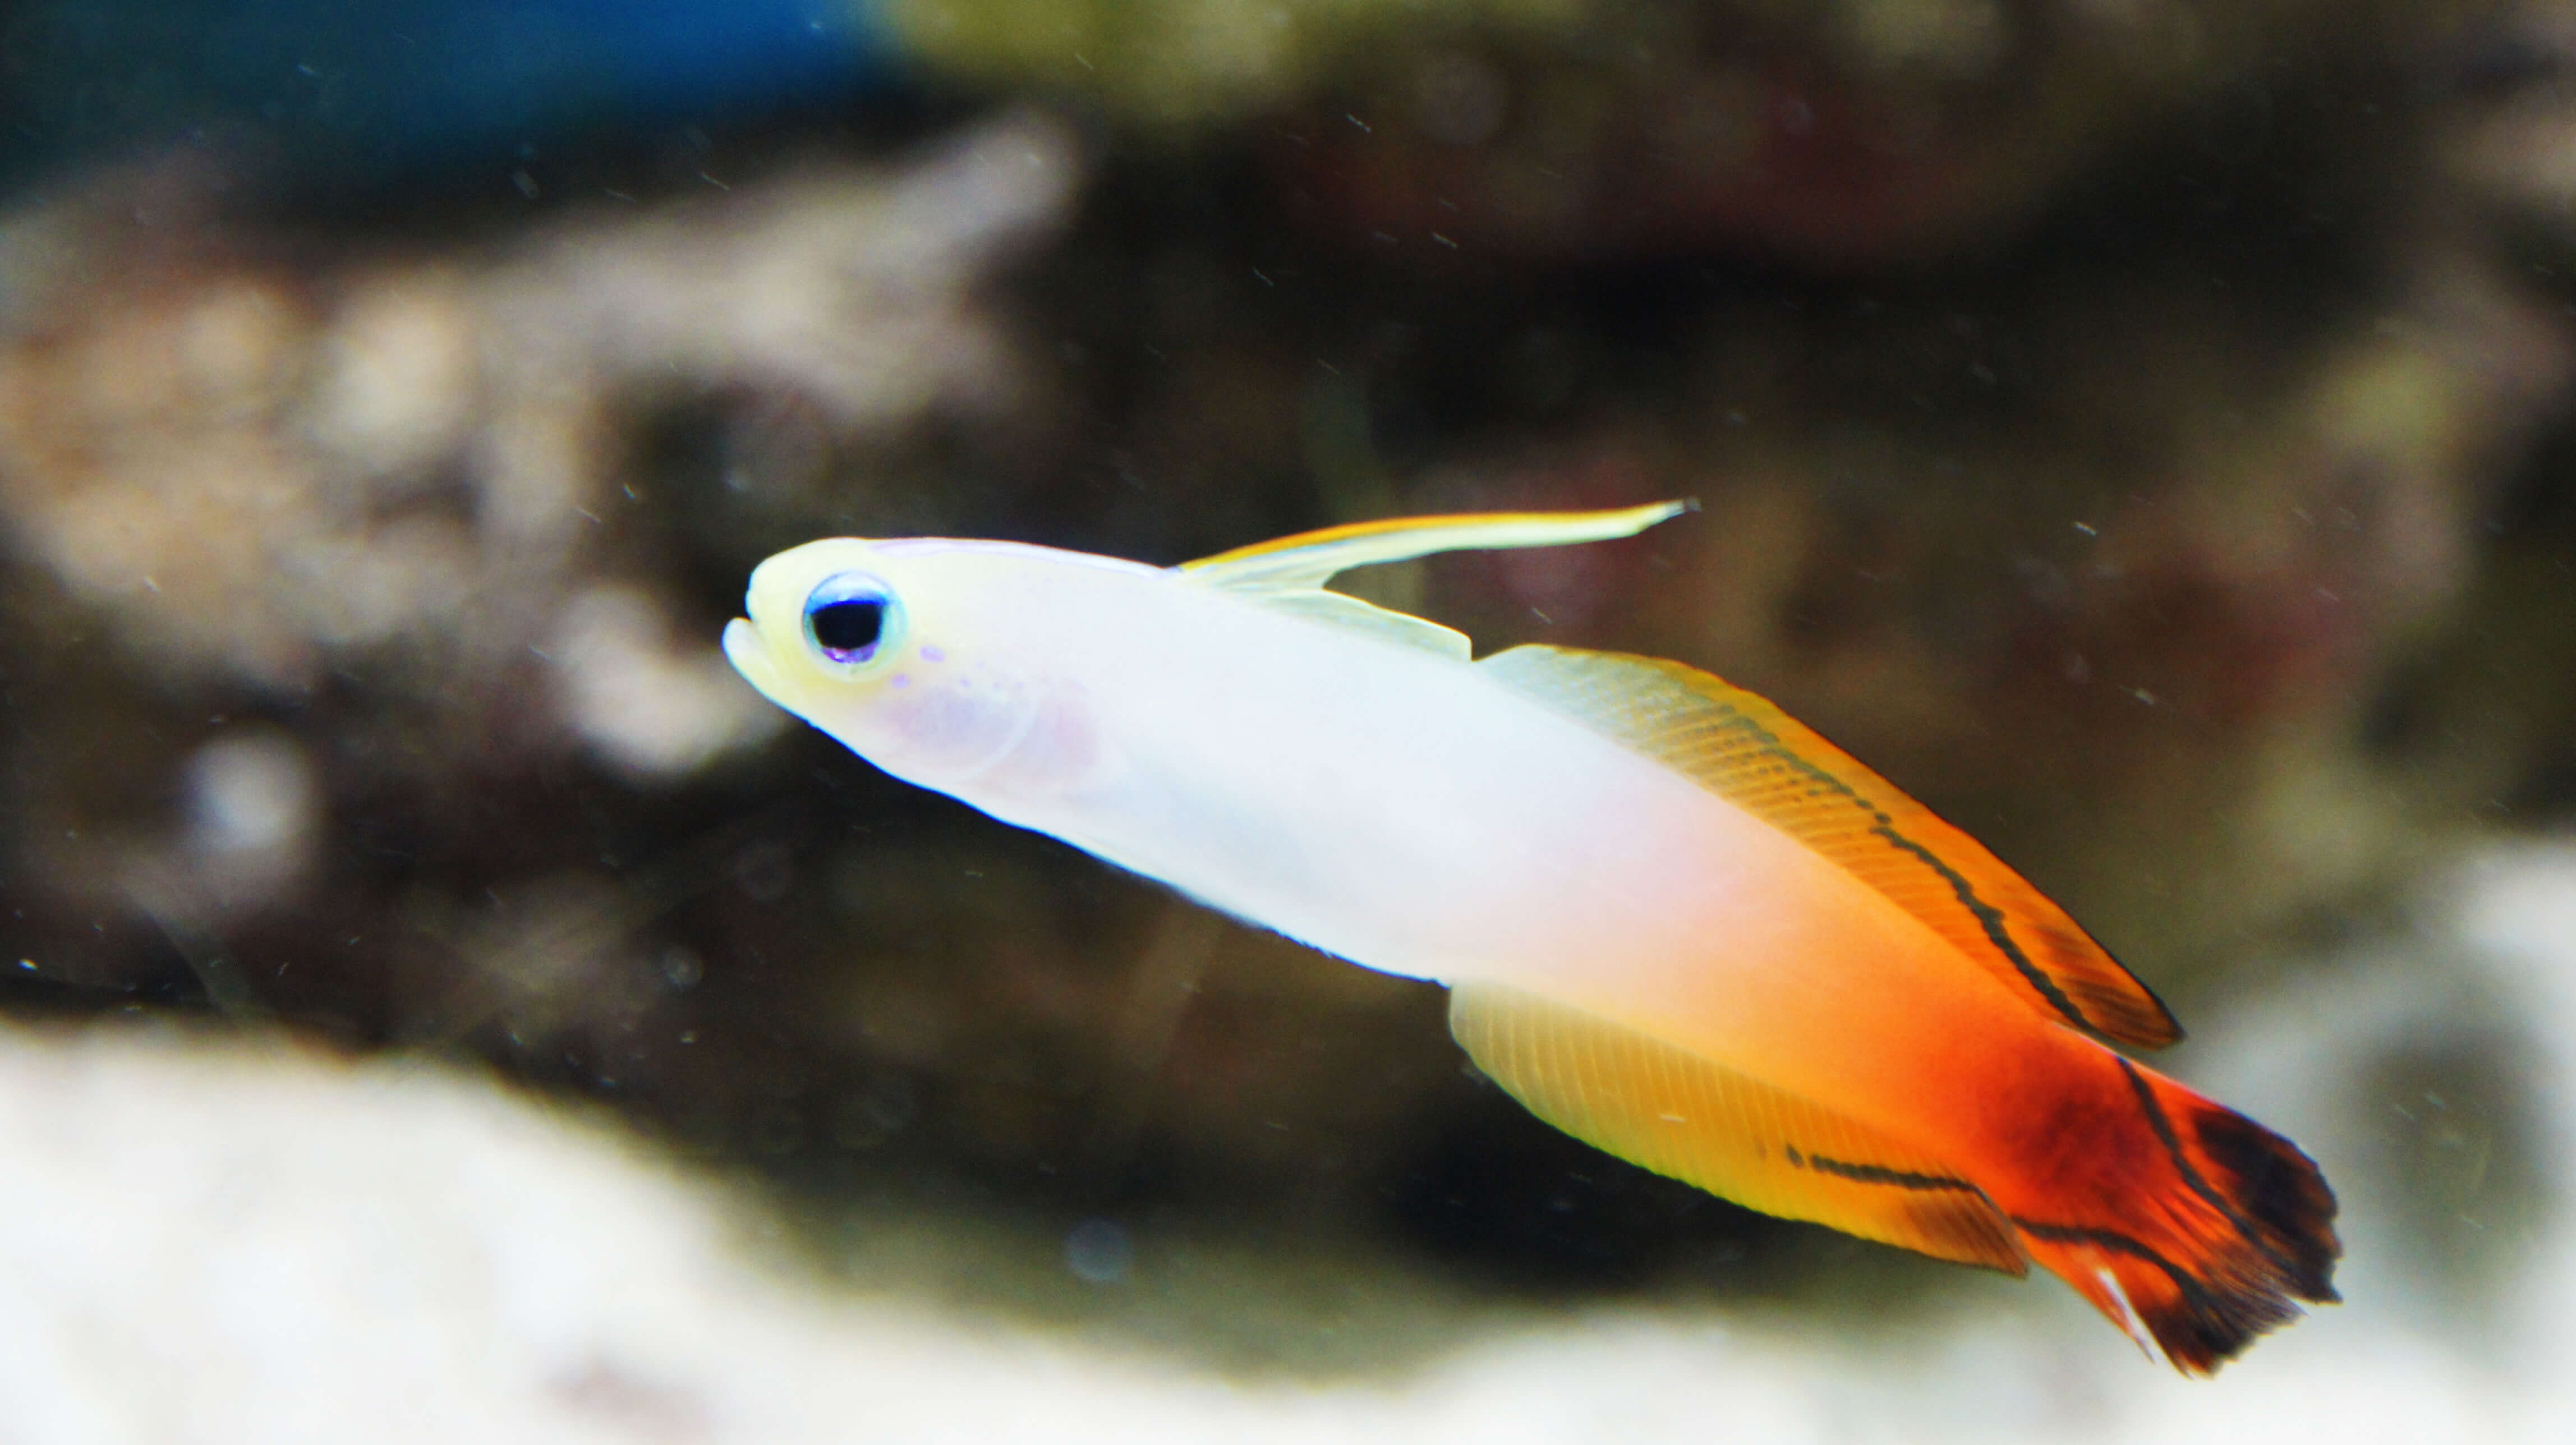 Image of a Firefish Goby